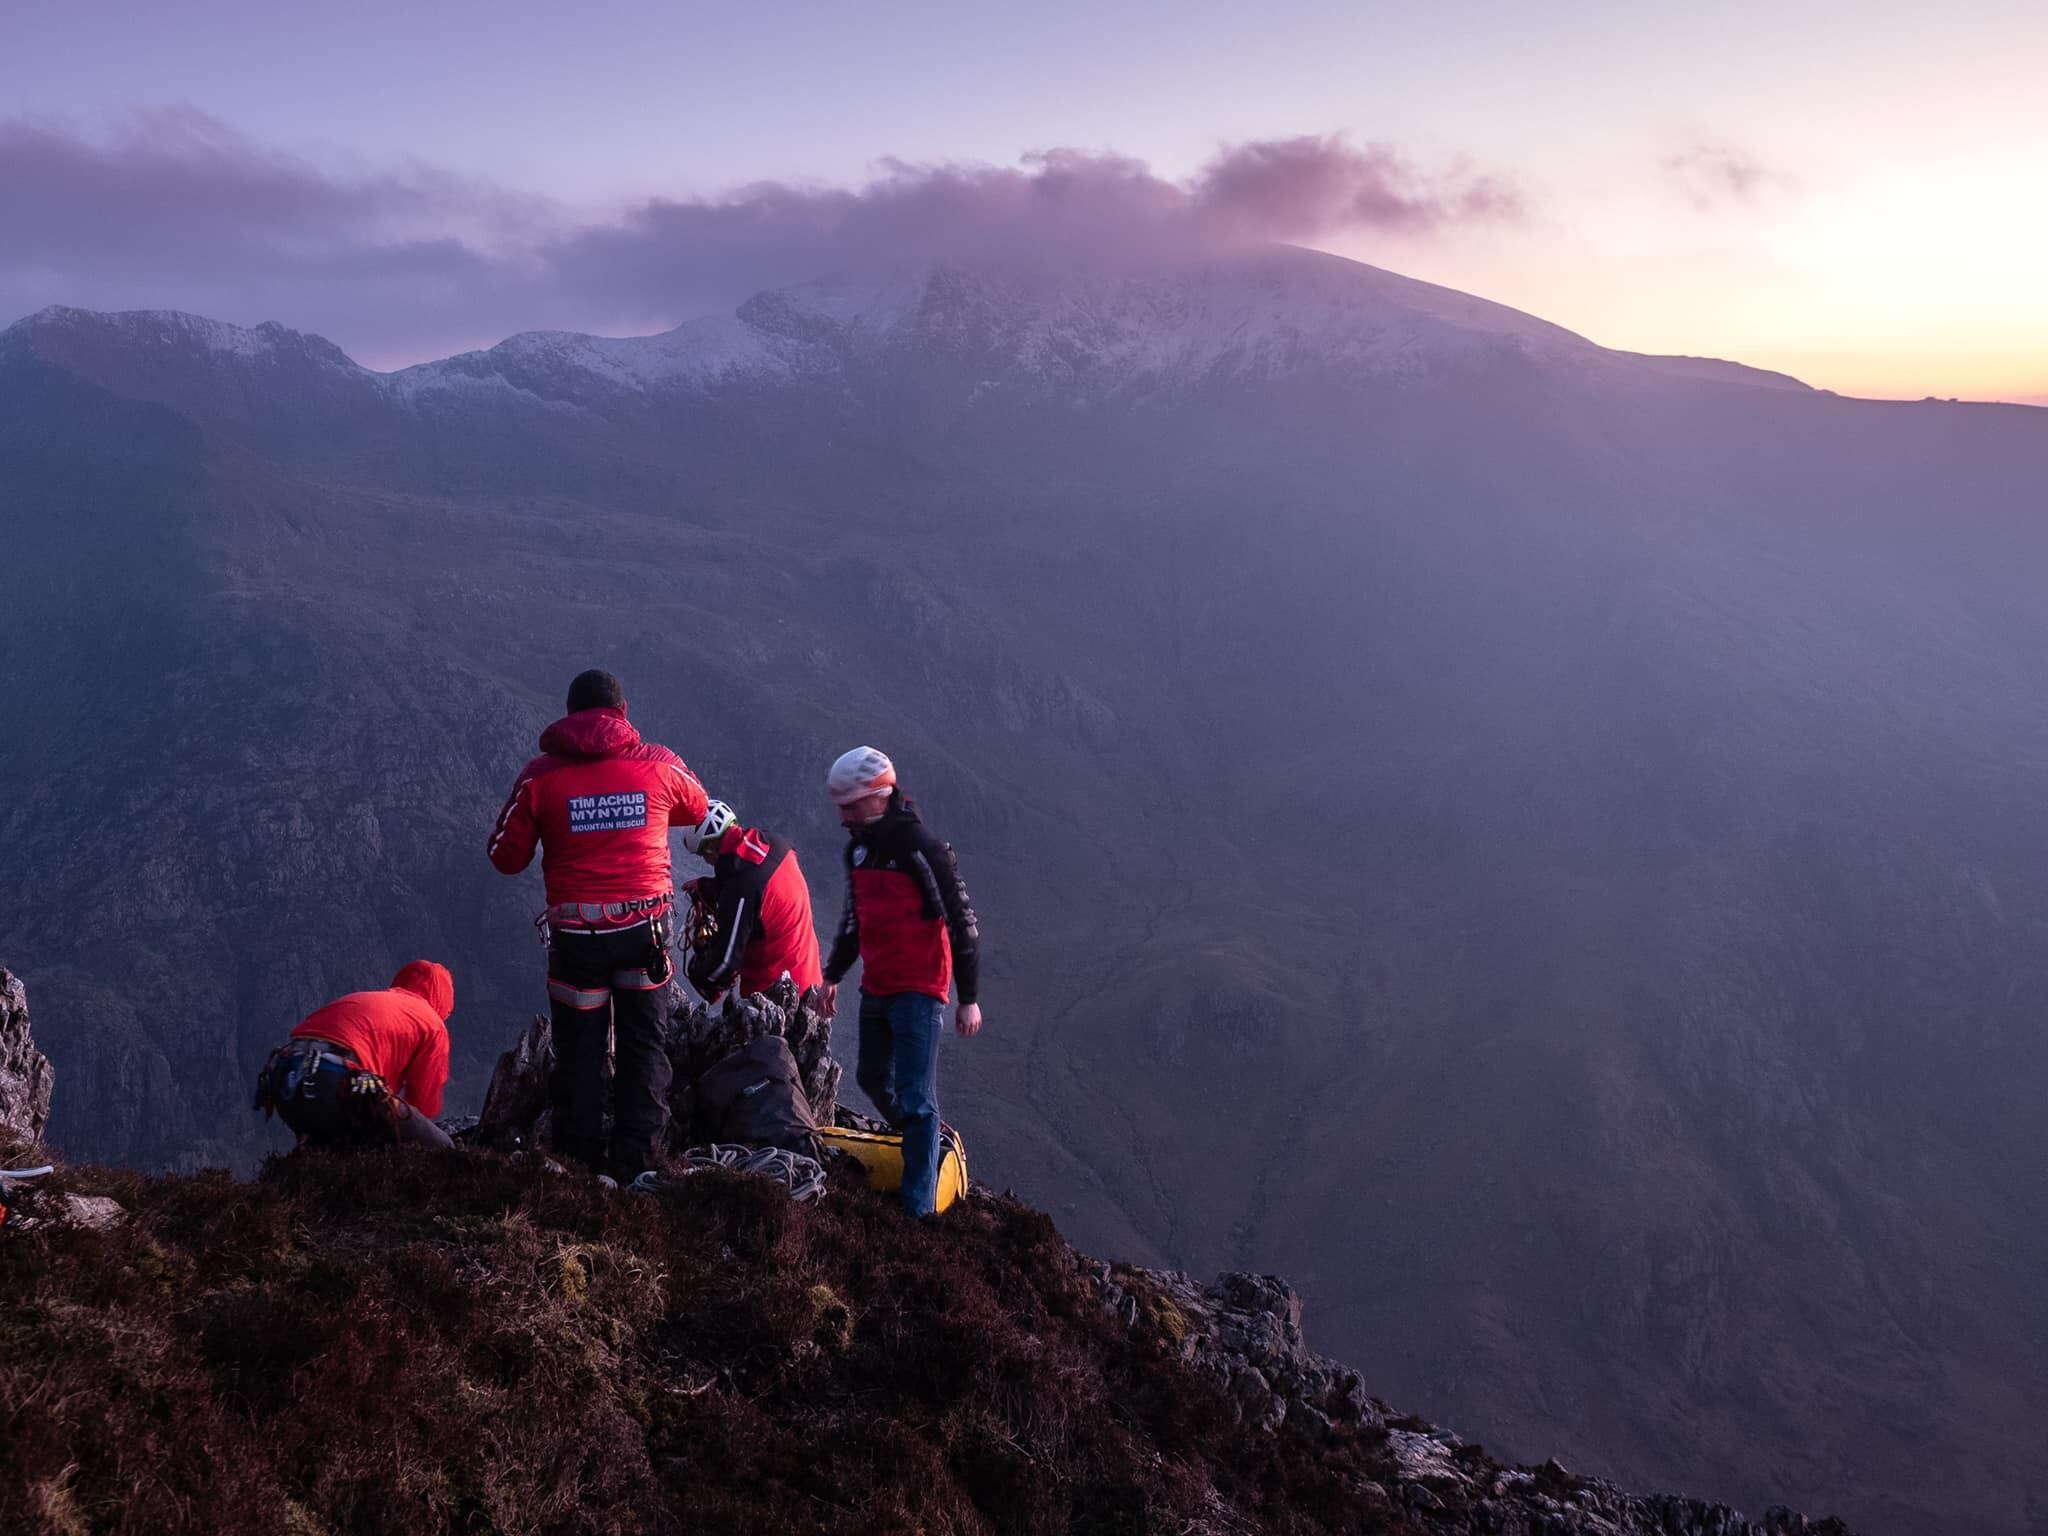 Visitors to Snowdon urged to 'think ahead' as emergency call-outs increasing at unsustainable rate